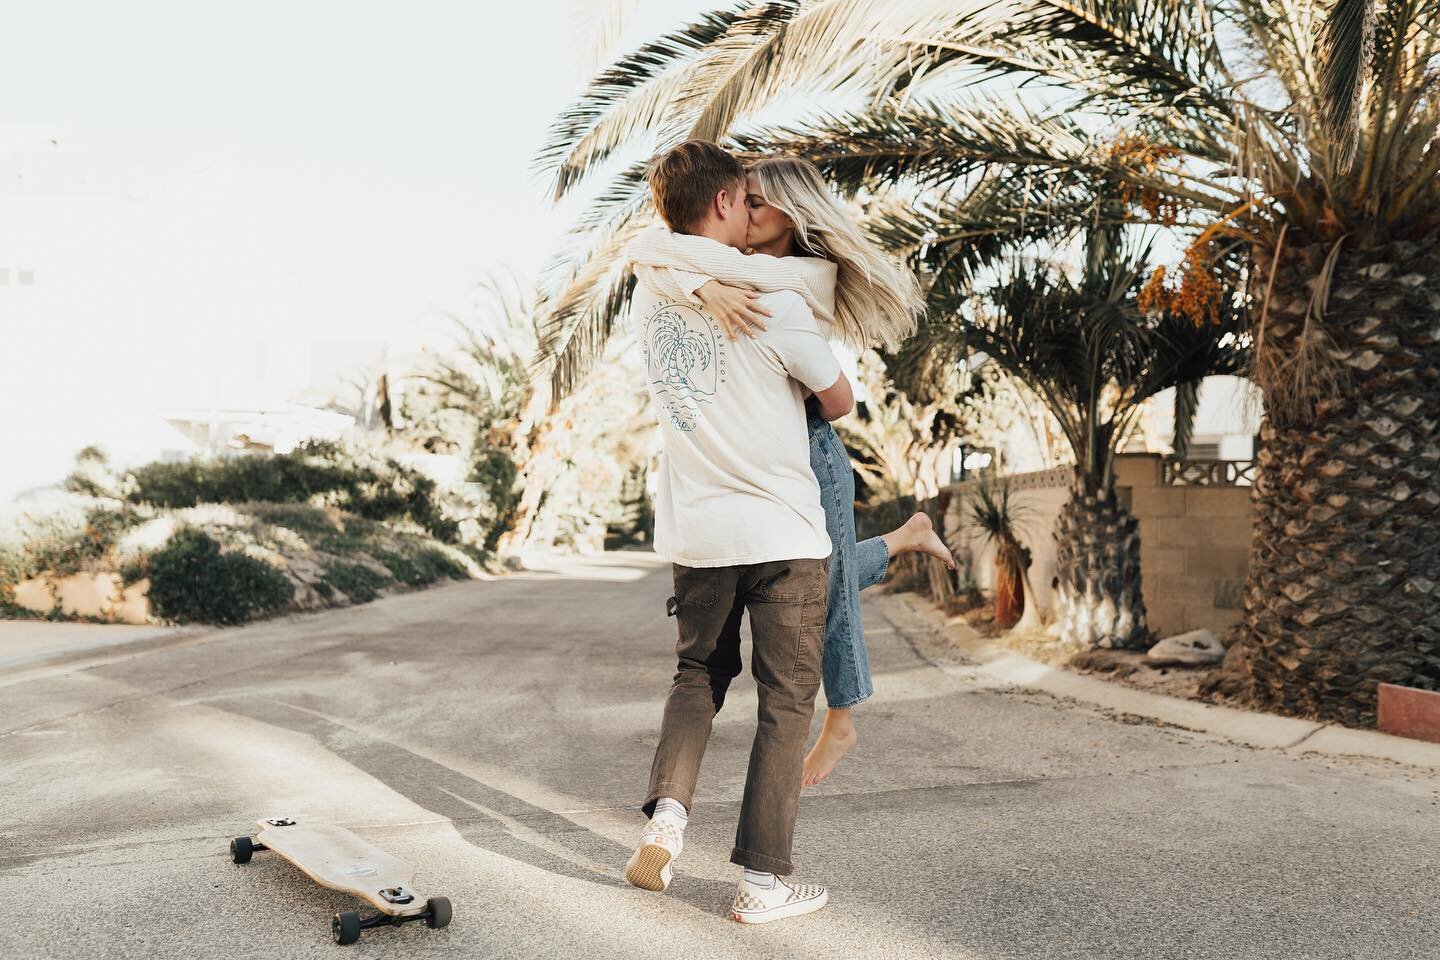 Skater babes 🛹☀️🌴

I&rsquo;m curious, what is your go-to date activity with your boo?! 🥰